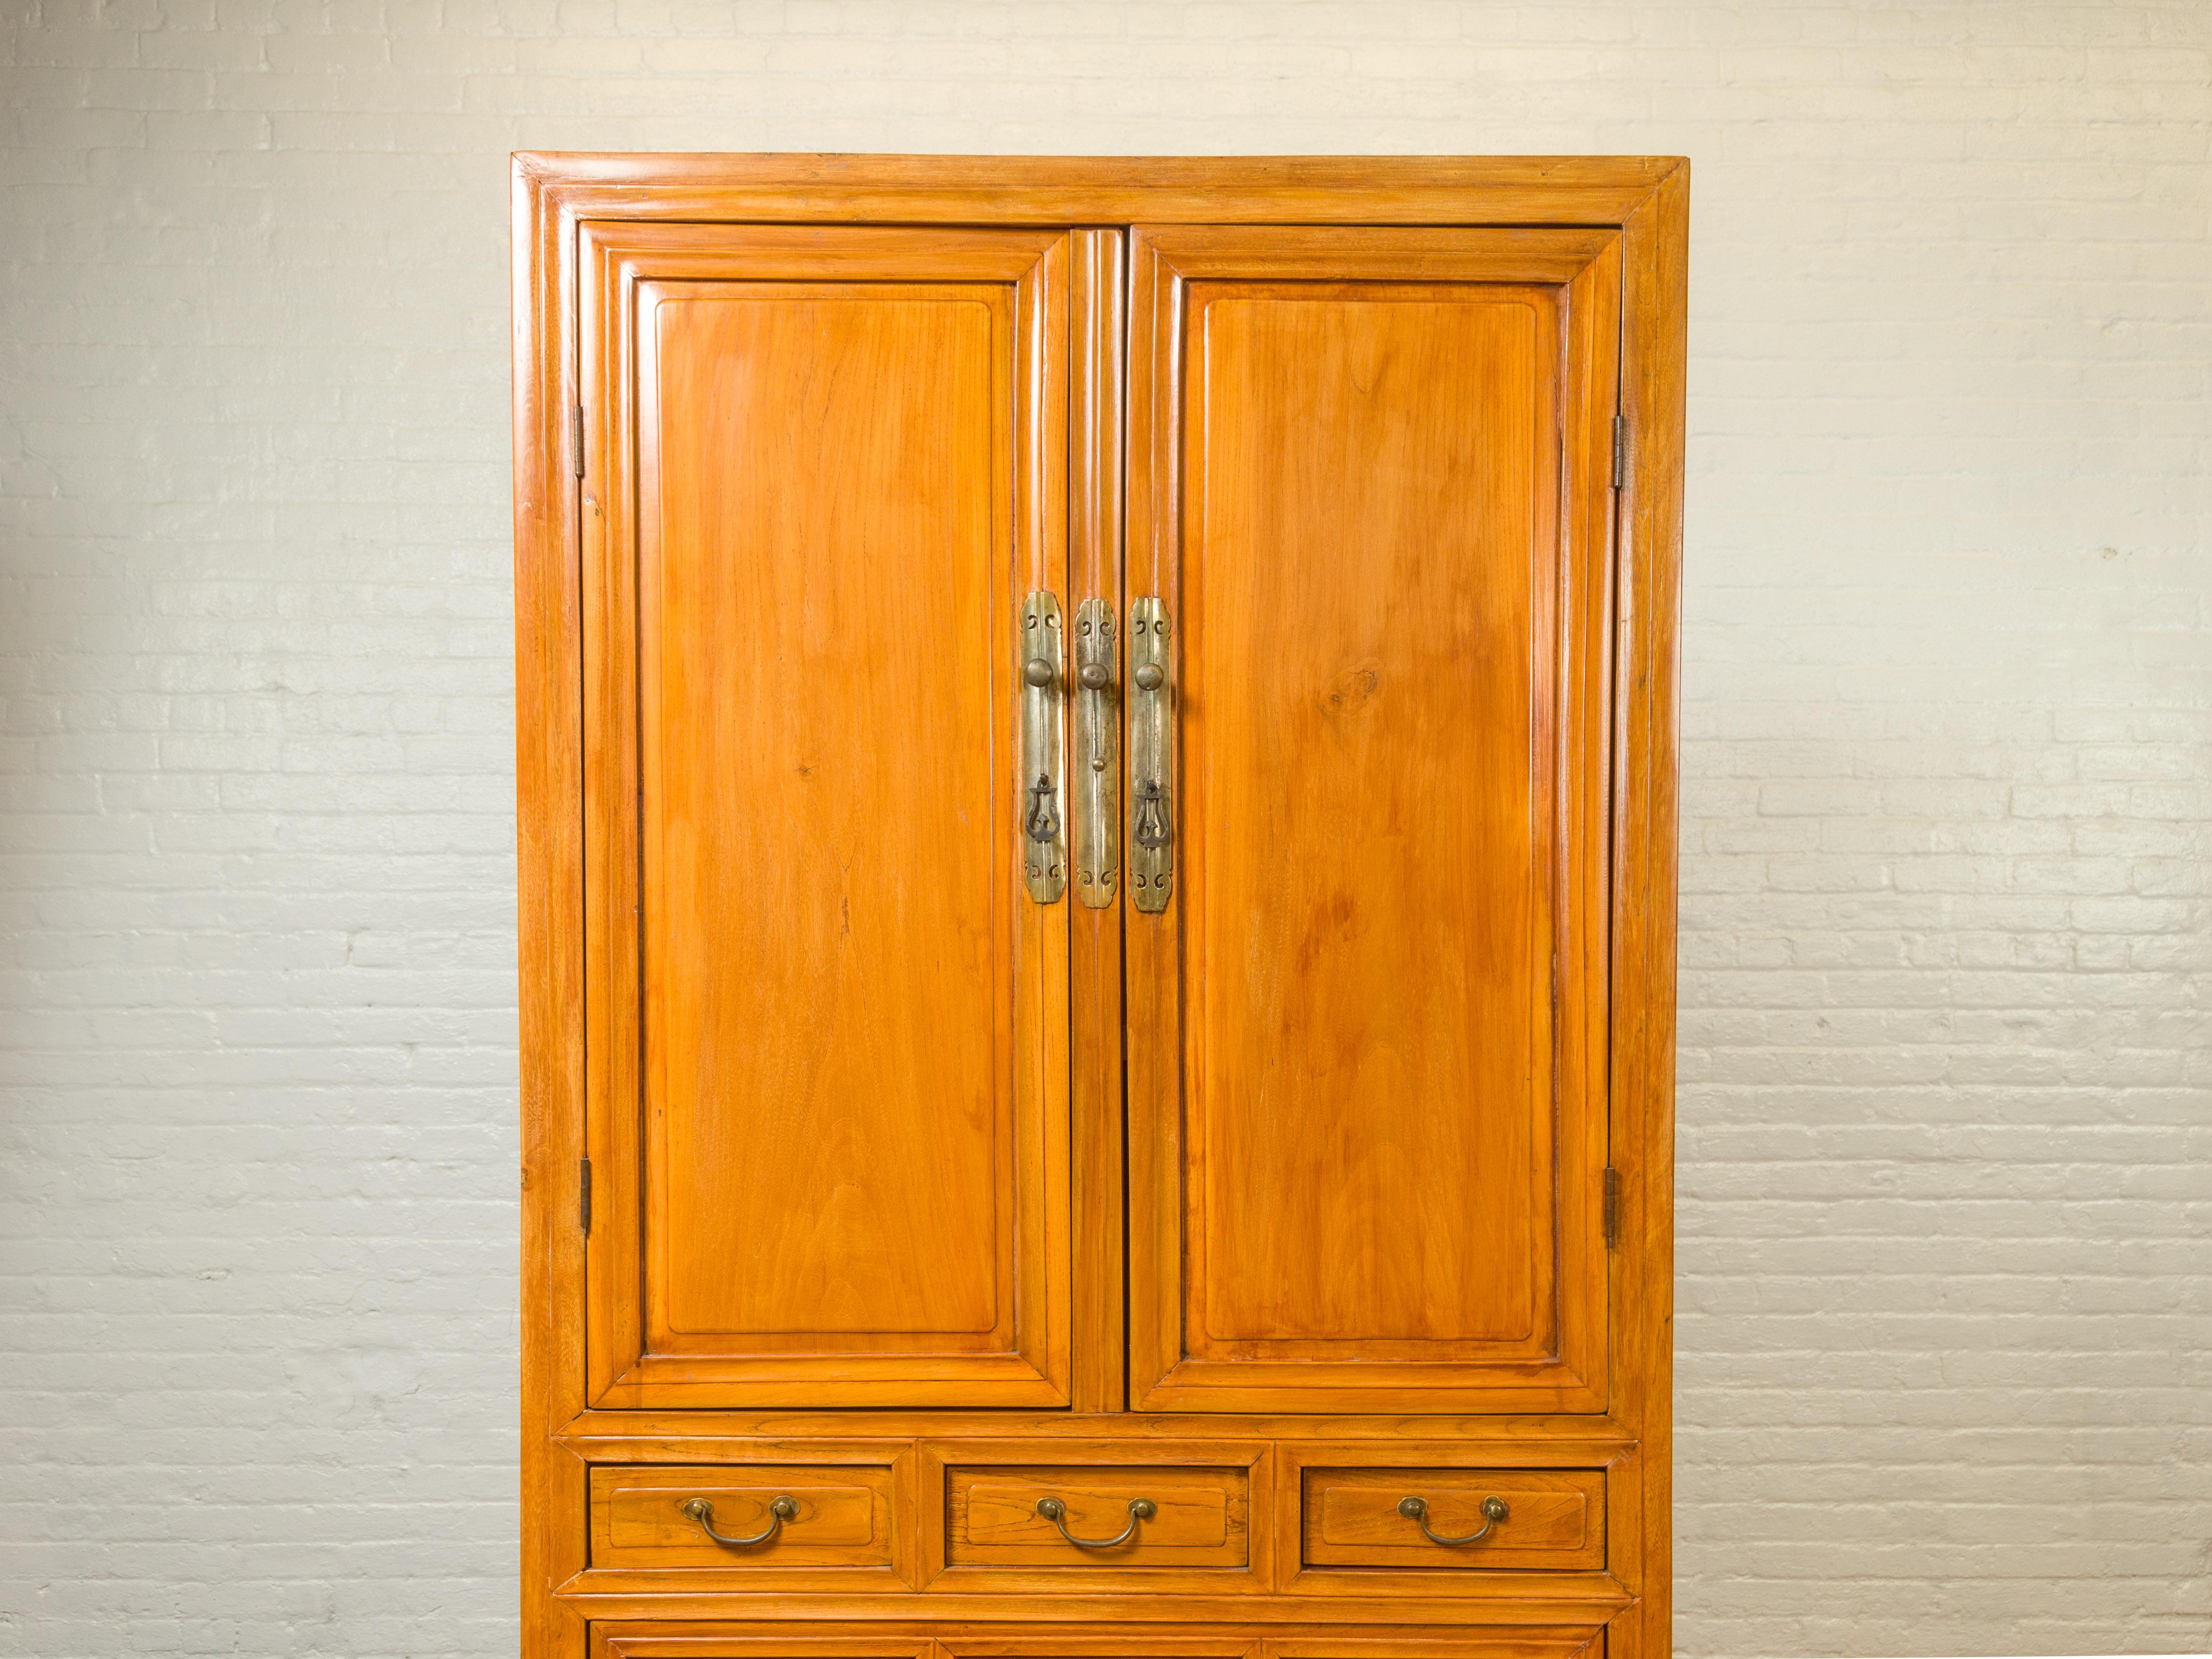 Chinese Ming Dynasty Style Elm Cabinet with Doors, Drawers and Removable Panel In Good Condition For Sale In Yonkers, NY